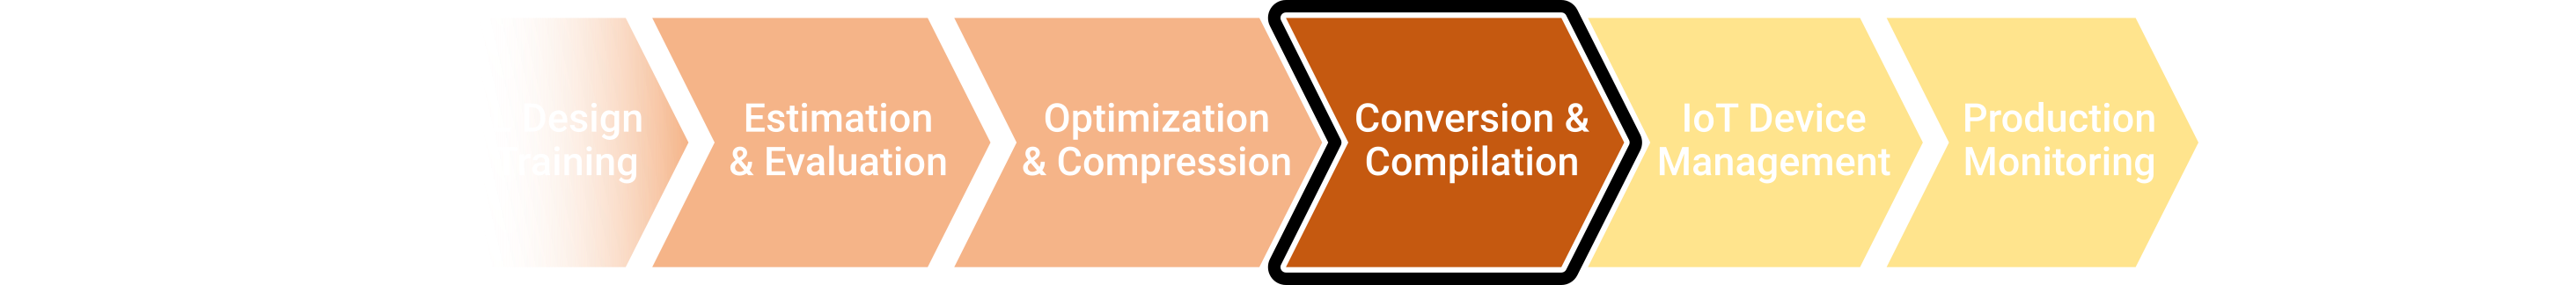 Conversion and compilation